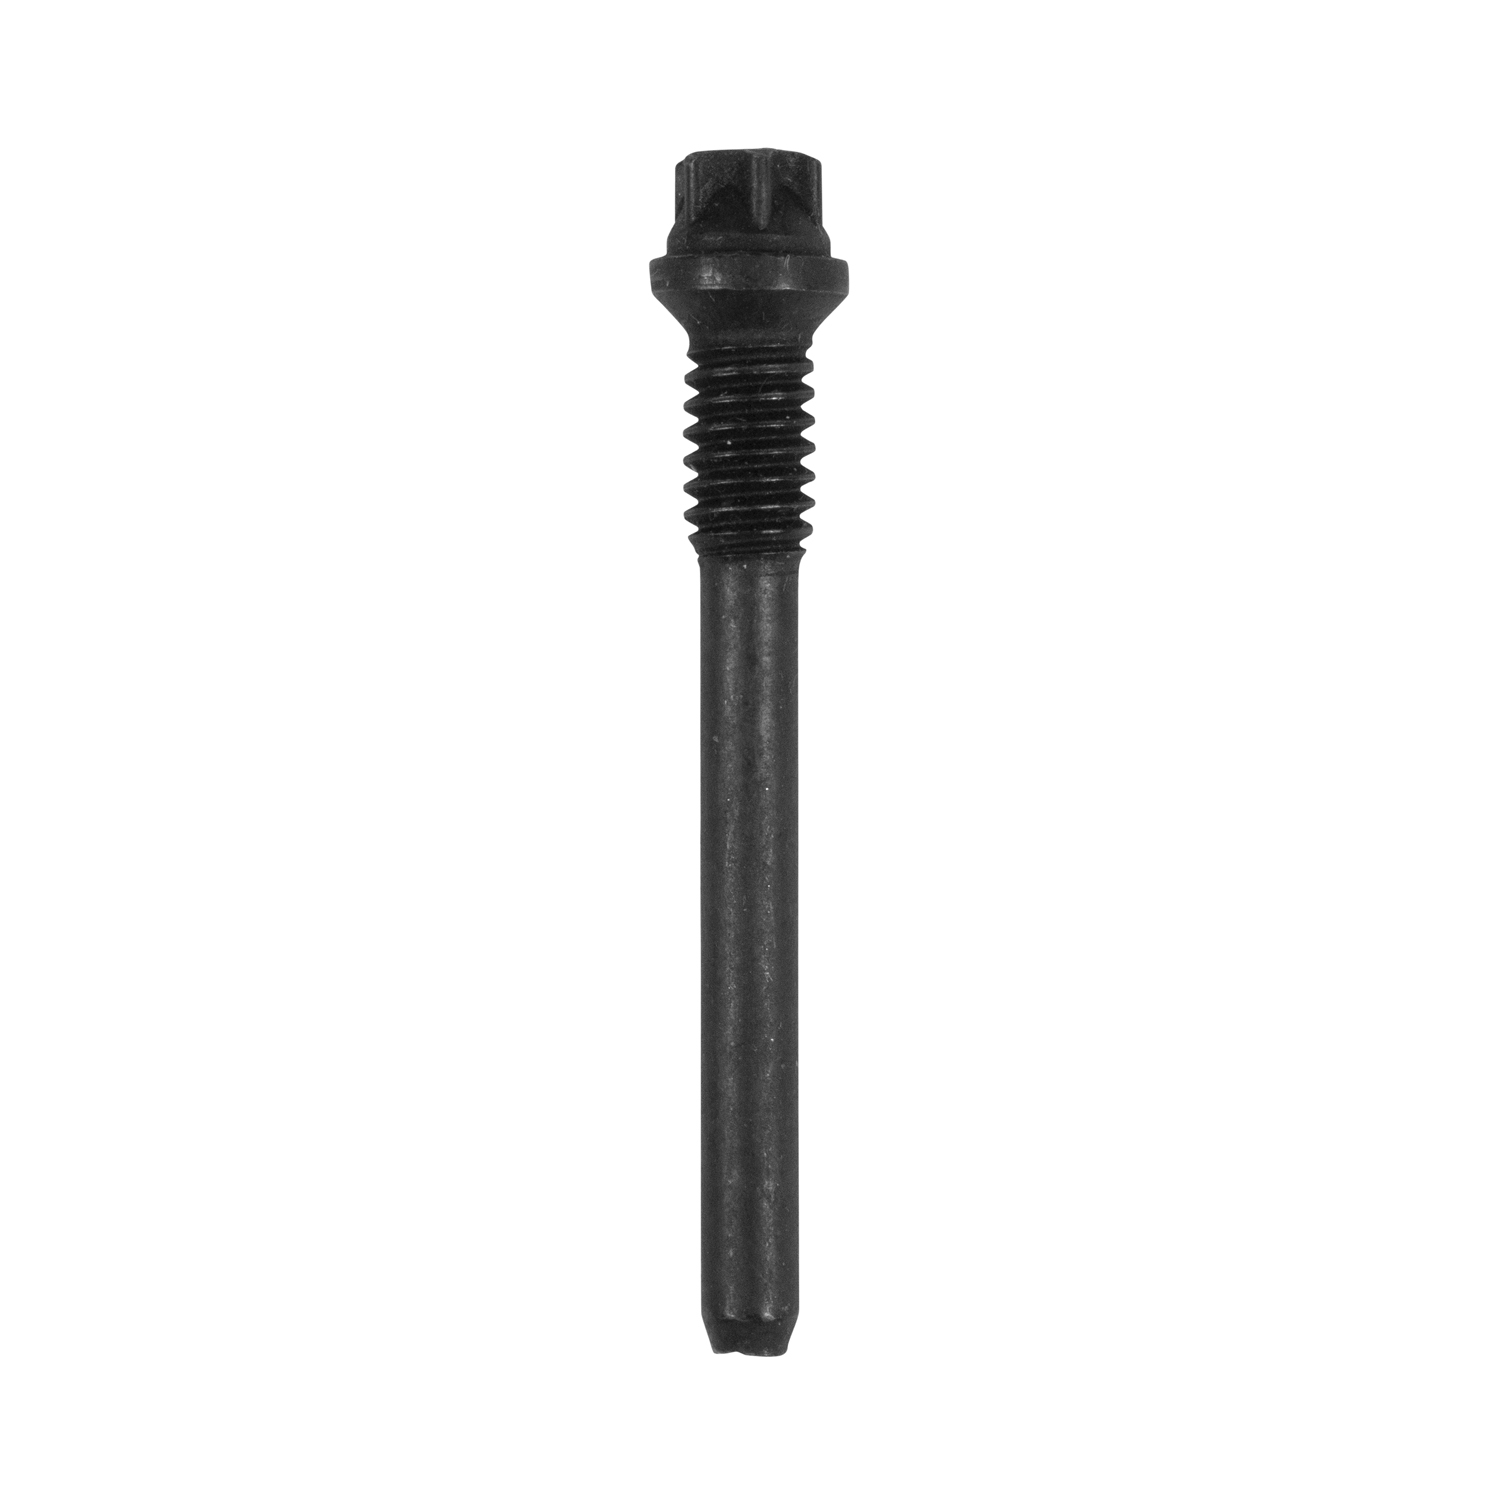 Dana 44-Hd (Hd Only ) Cross Pin Bolt, Standard Open & Tracloc (With C-Clip).